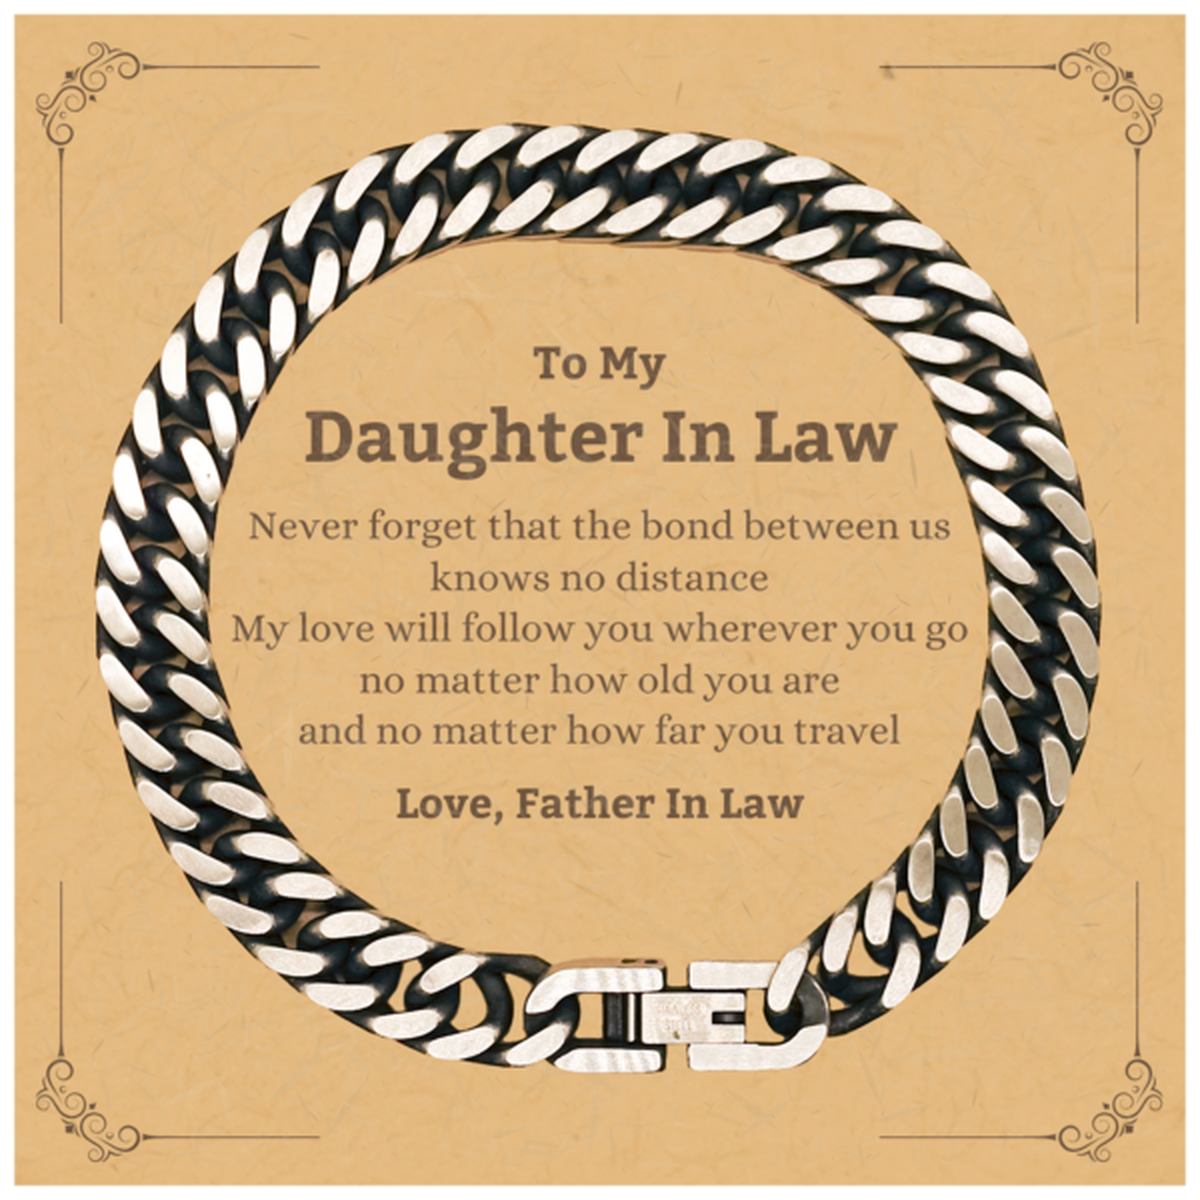 Daughter In Law Birthday Gifts from Father In Law, Adjustable Cuban Link Chain Bracelet for Daughter In Law Christmas Graduation Unique Gifts Daughter In Law Never forget that the bond between us knows no distance. Love, Father In Law